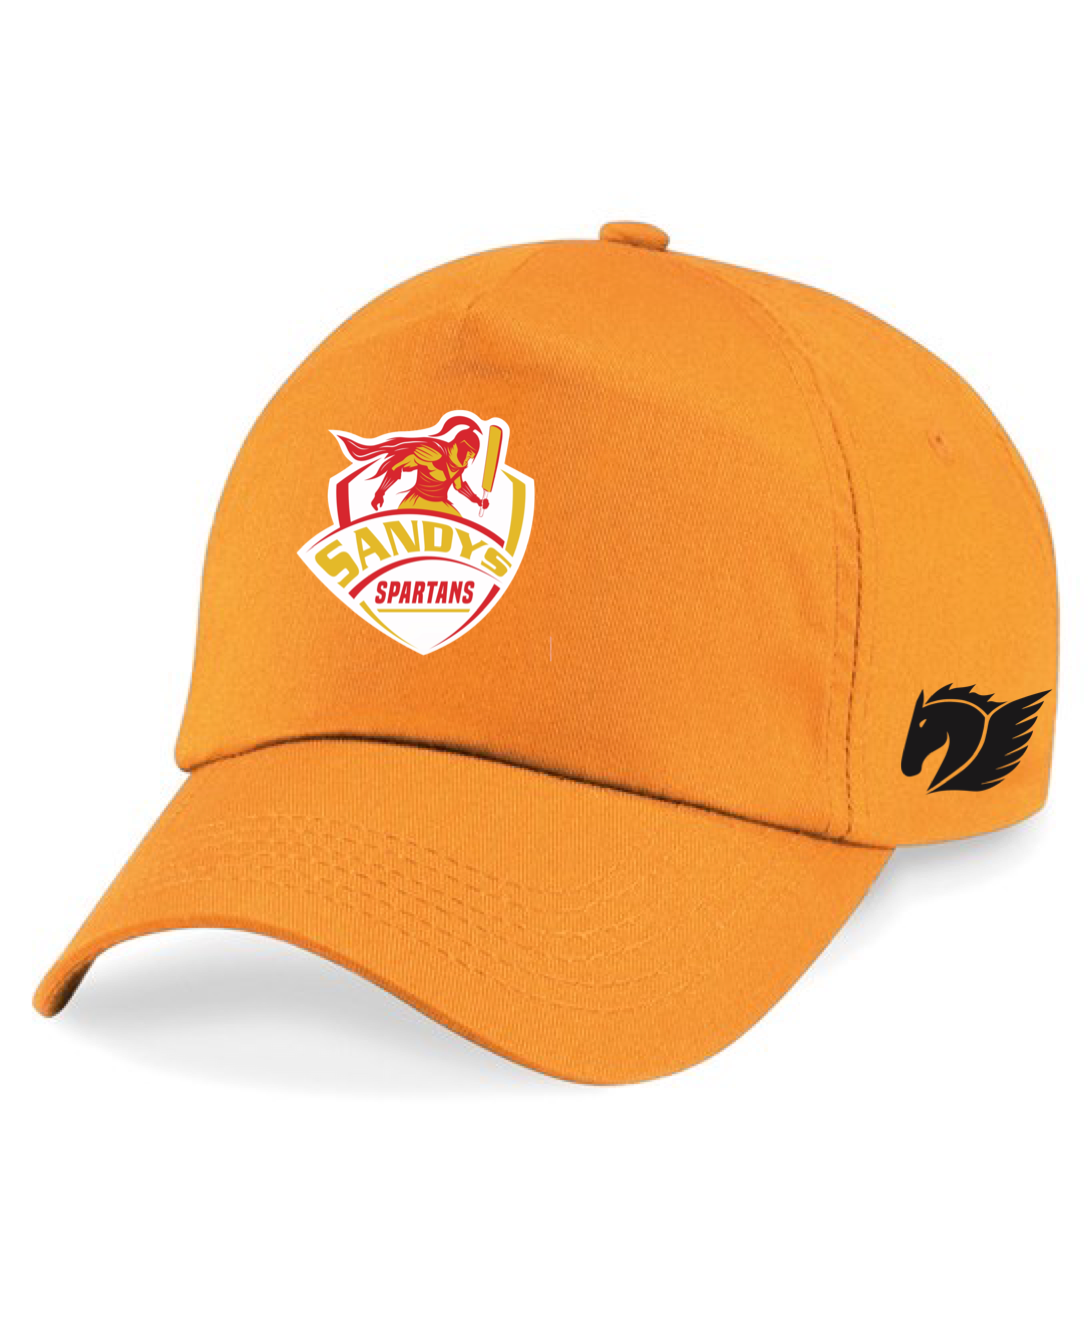 Sandy’s Spartans Supporters Cap